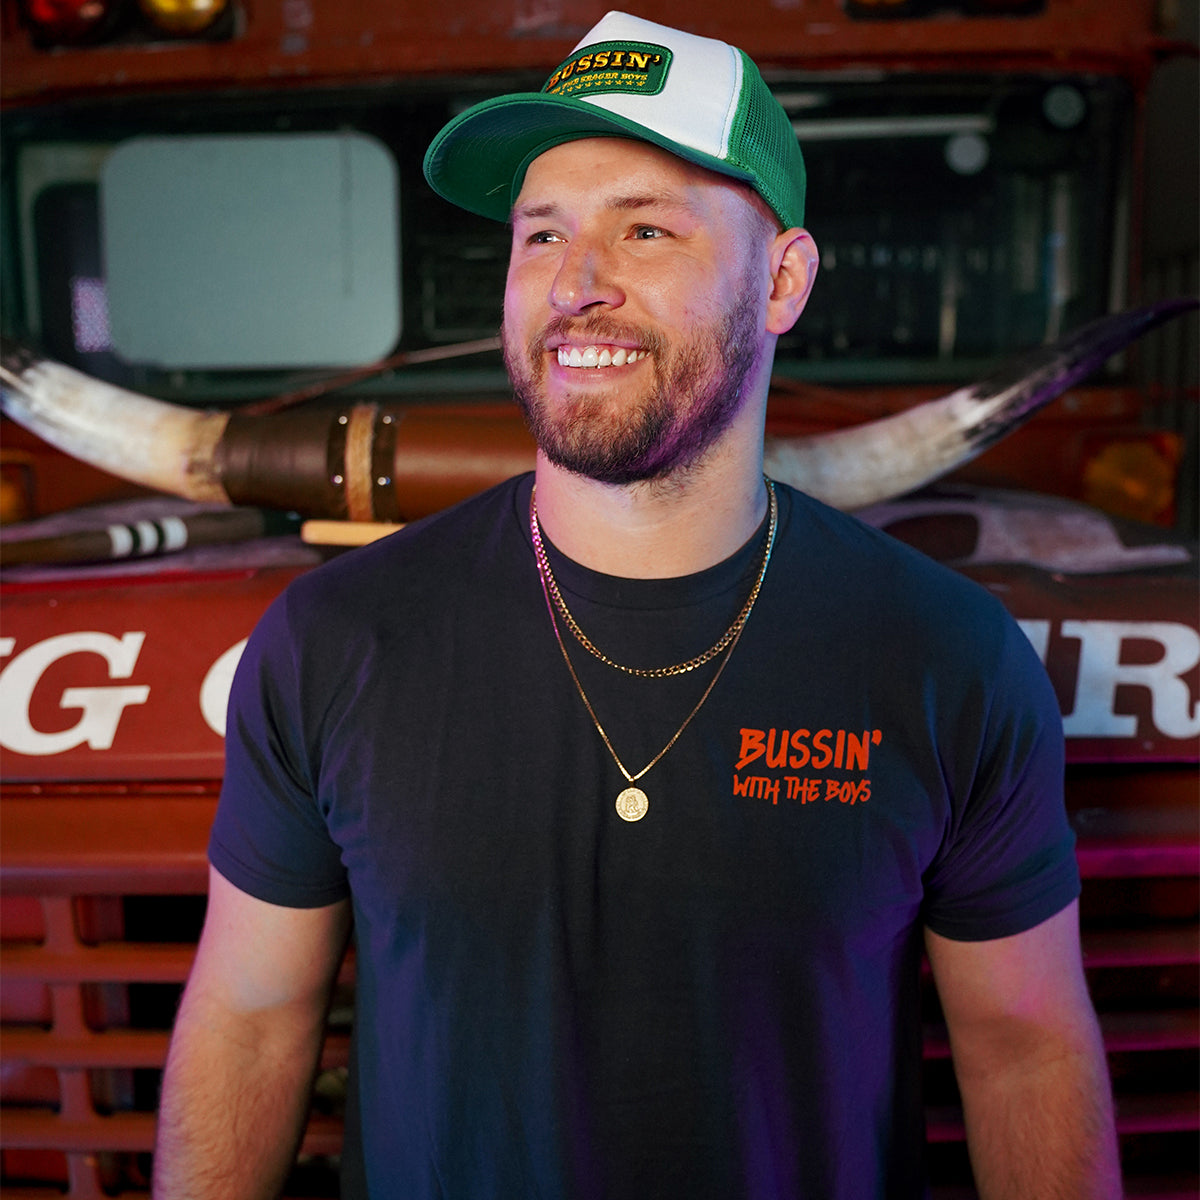 Seager x Bussin With The Boys Patch Trucker Hat-Hats-Bussin With The Boys-Green-Barstool Sports